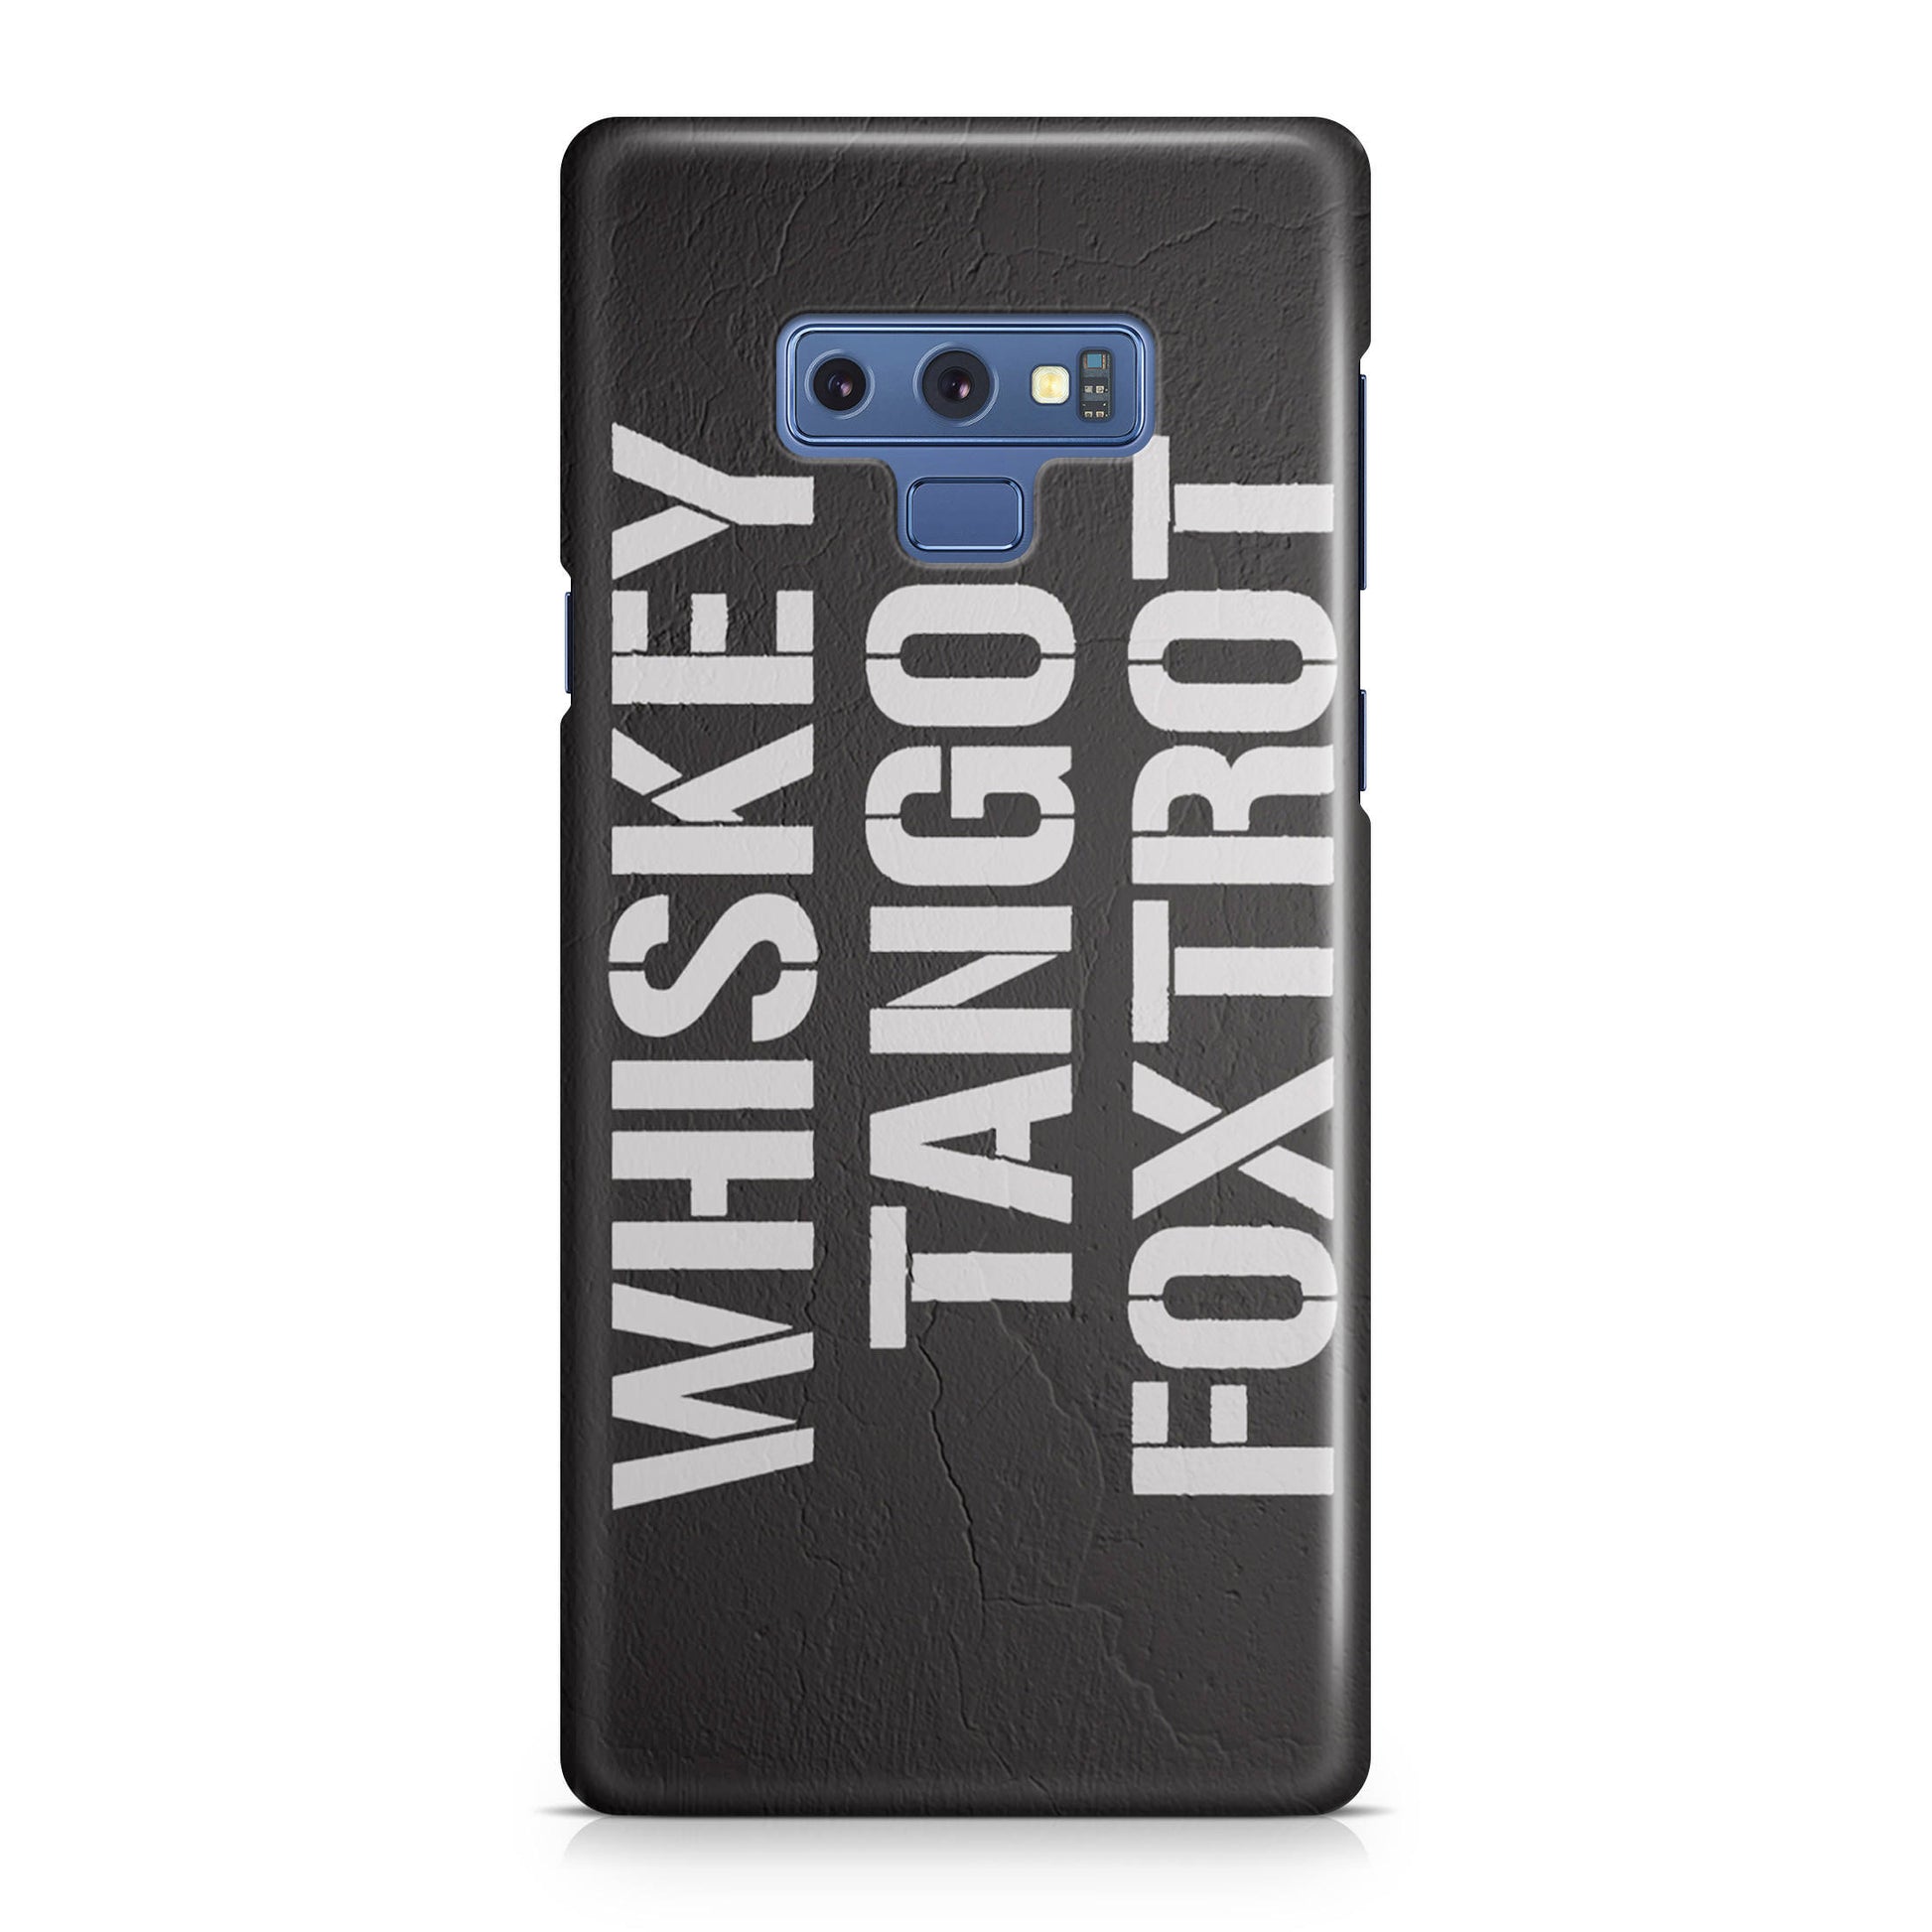 Military Signal Code Galaxy Note 9 Case